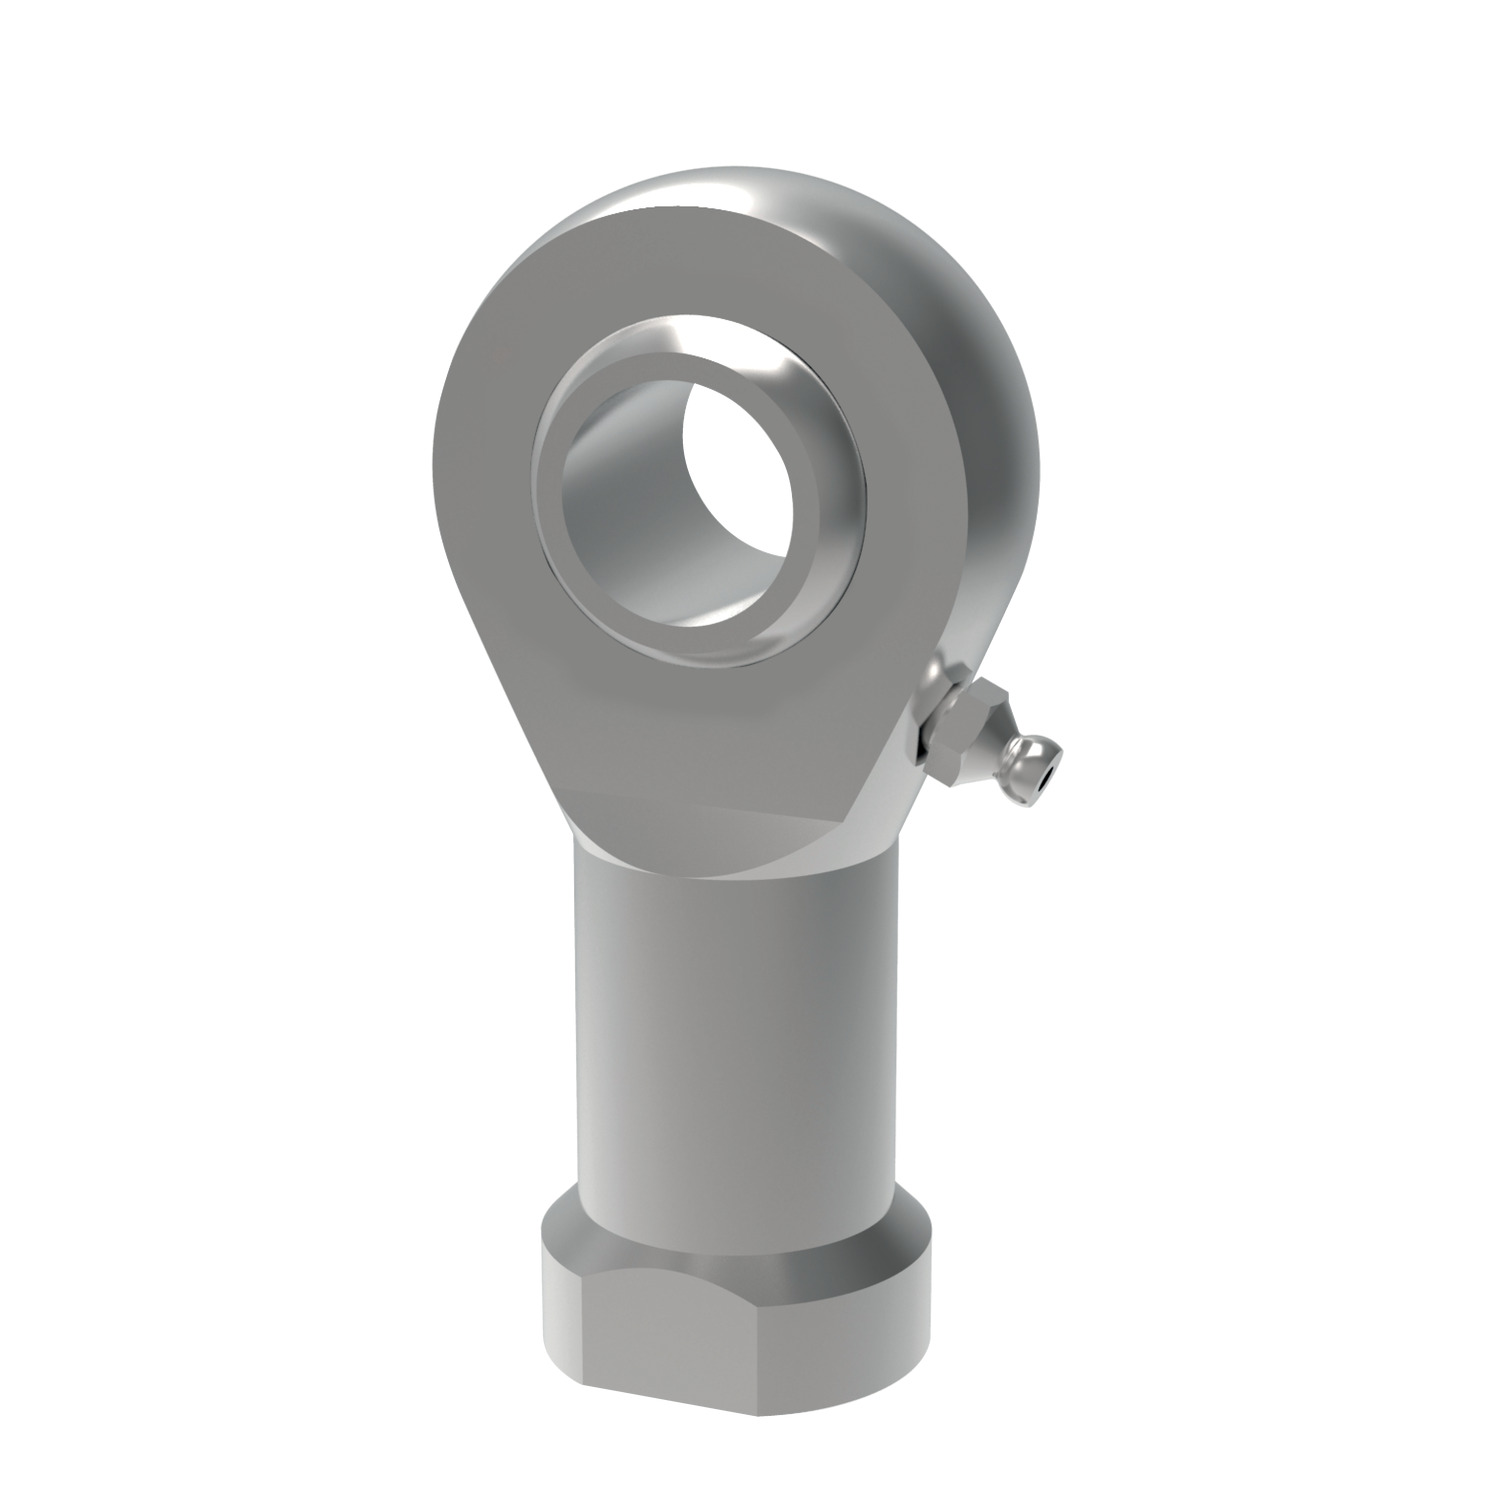 Stainless Heavy-Duty Rod Ends - Female Stainless steel heavy duty female rod end with ball bearings in the raceway.